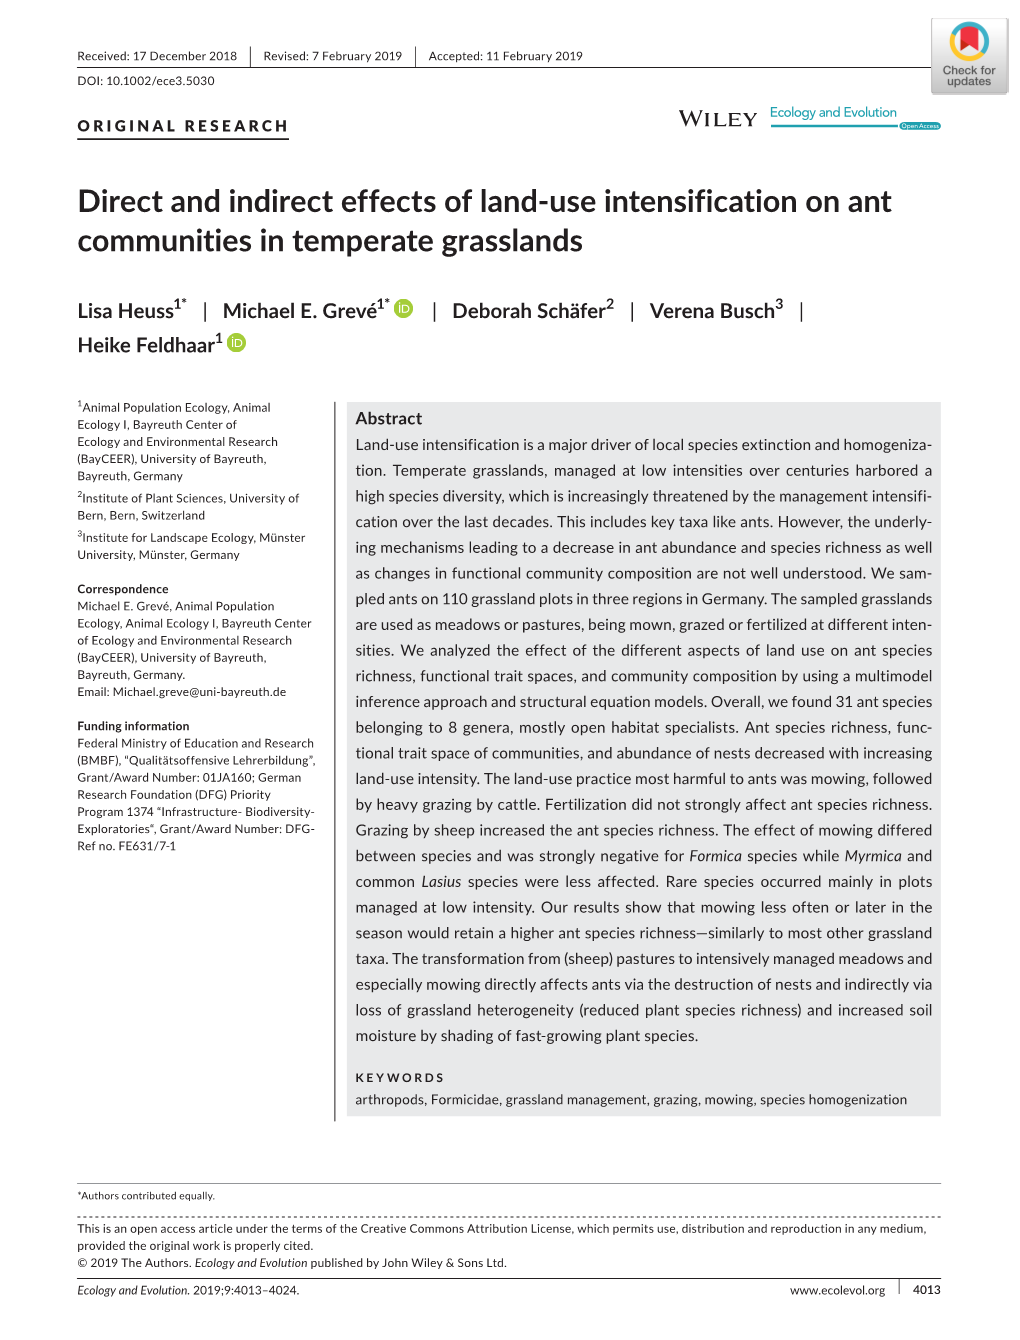 Direct and Indirect Effects of Land‐Use Intensification on Ant Communities in Temperate Grasslands